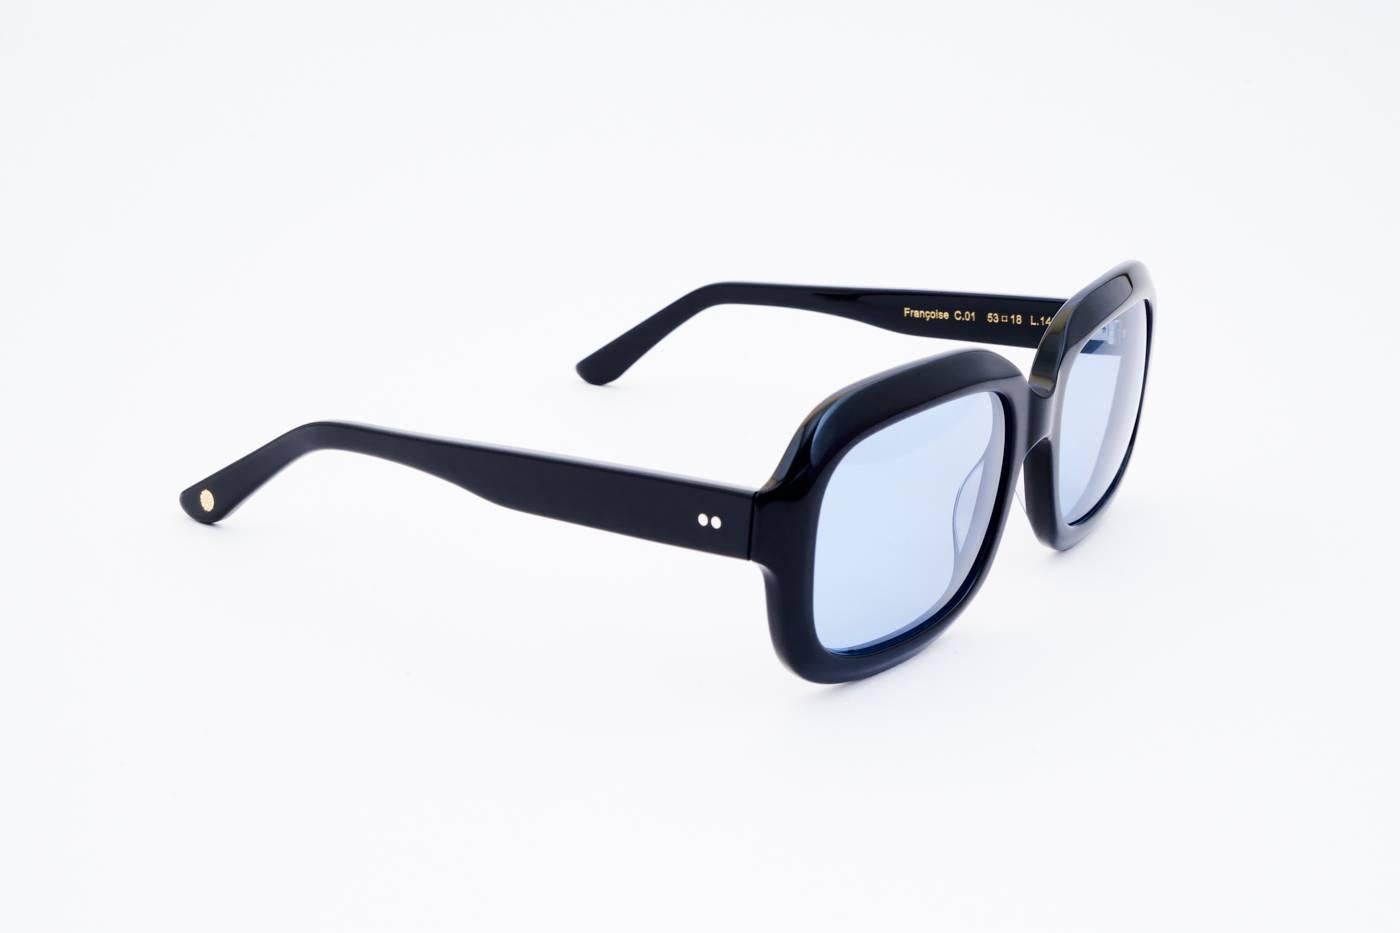 Berenford Françoise spectacle style is inspired by the style icon and timeless muse Françoise Hardy. While genuine and sophisticated, she has been the epitome of an ideal woman for Sir Berenford and Mick Jagger, inspiring talents as Bob Dylan and